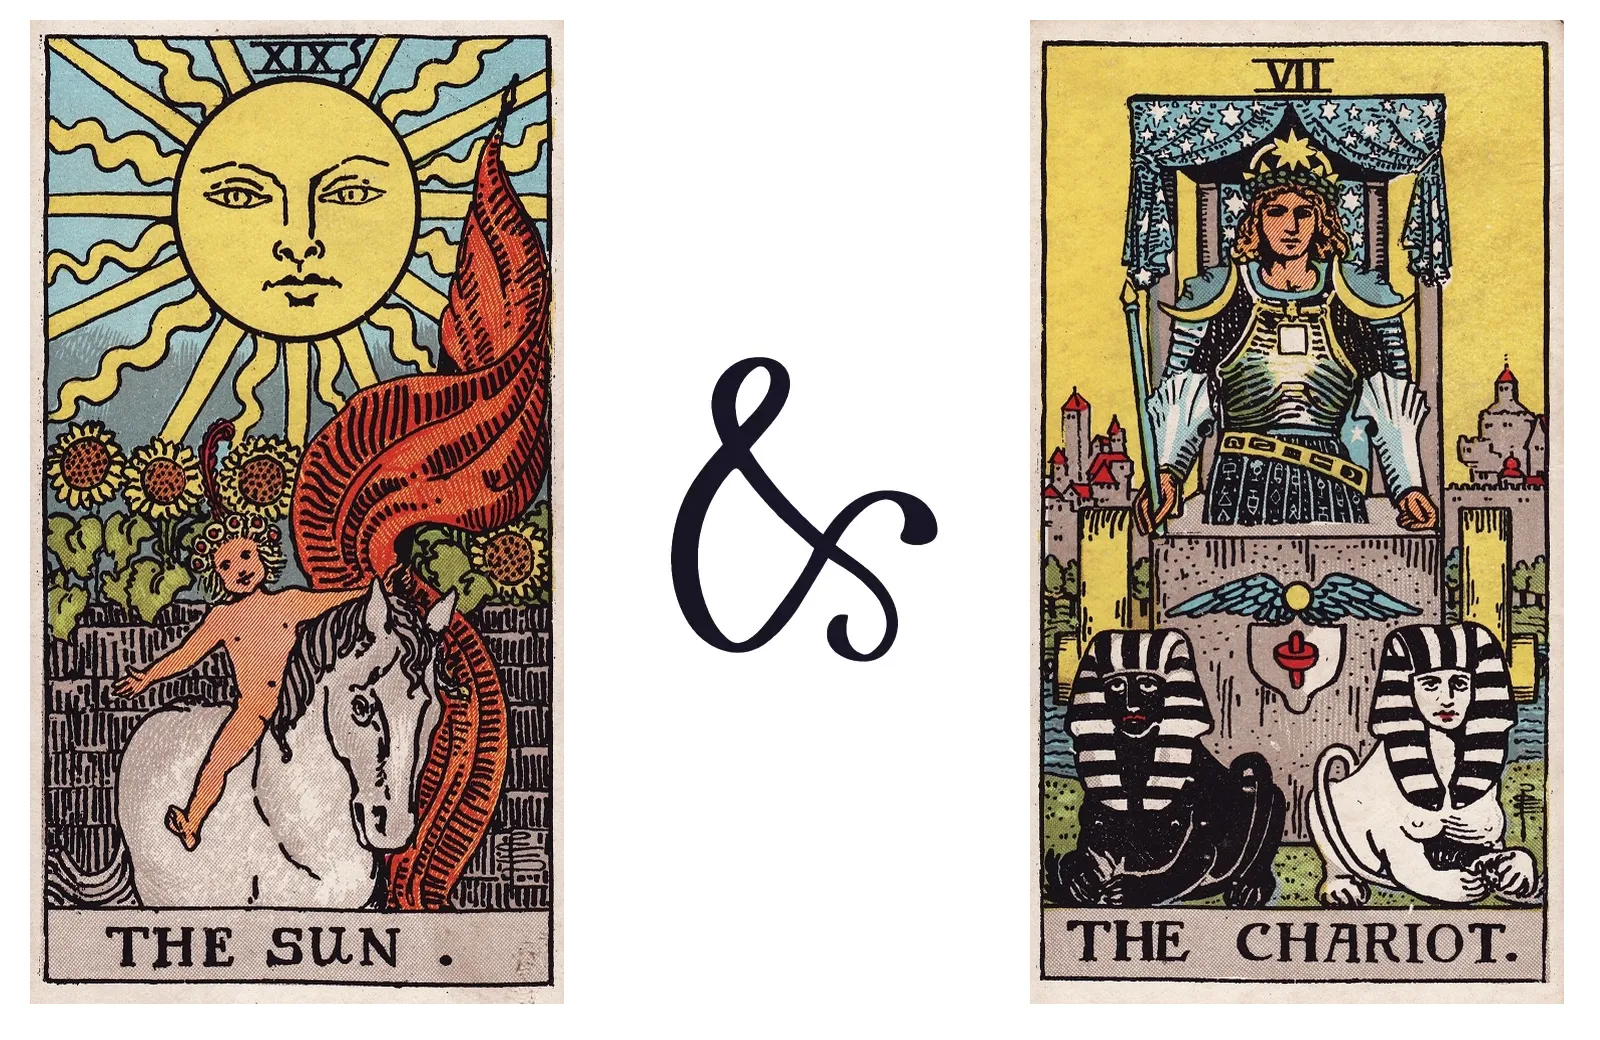 The Sun and The Chariot